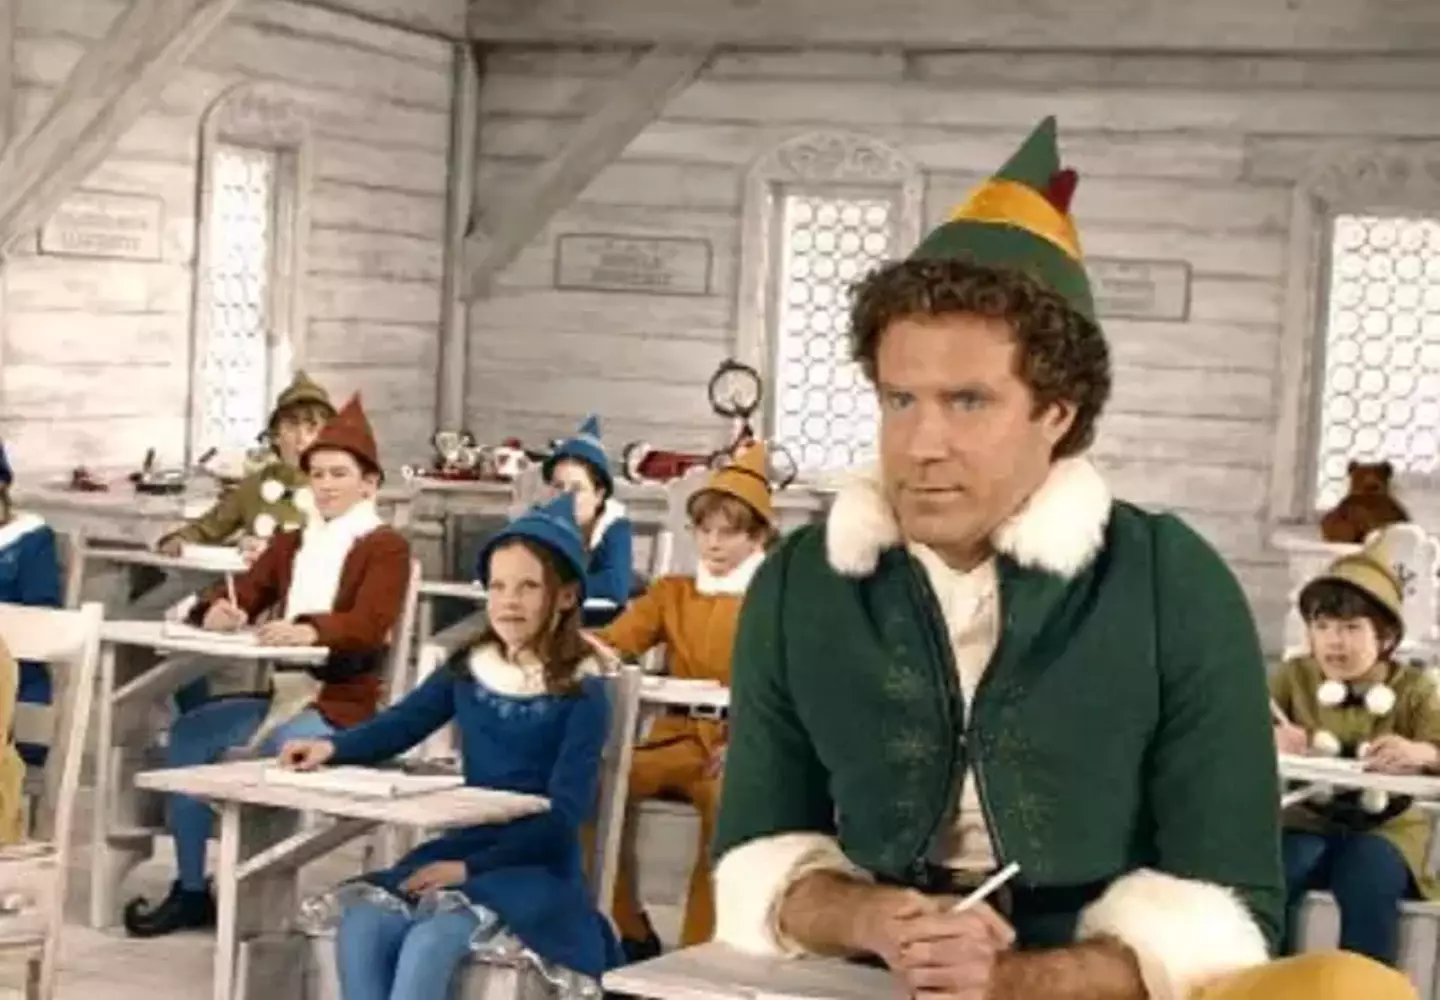 The first film follows Buddy (Will Ferrell), who is raised by elves at the North Pole.